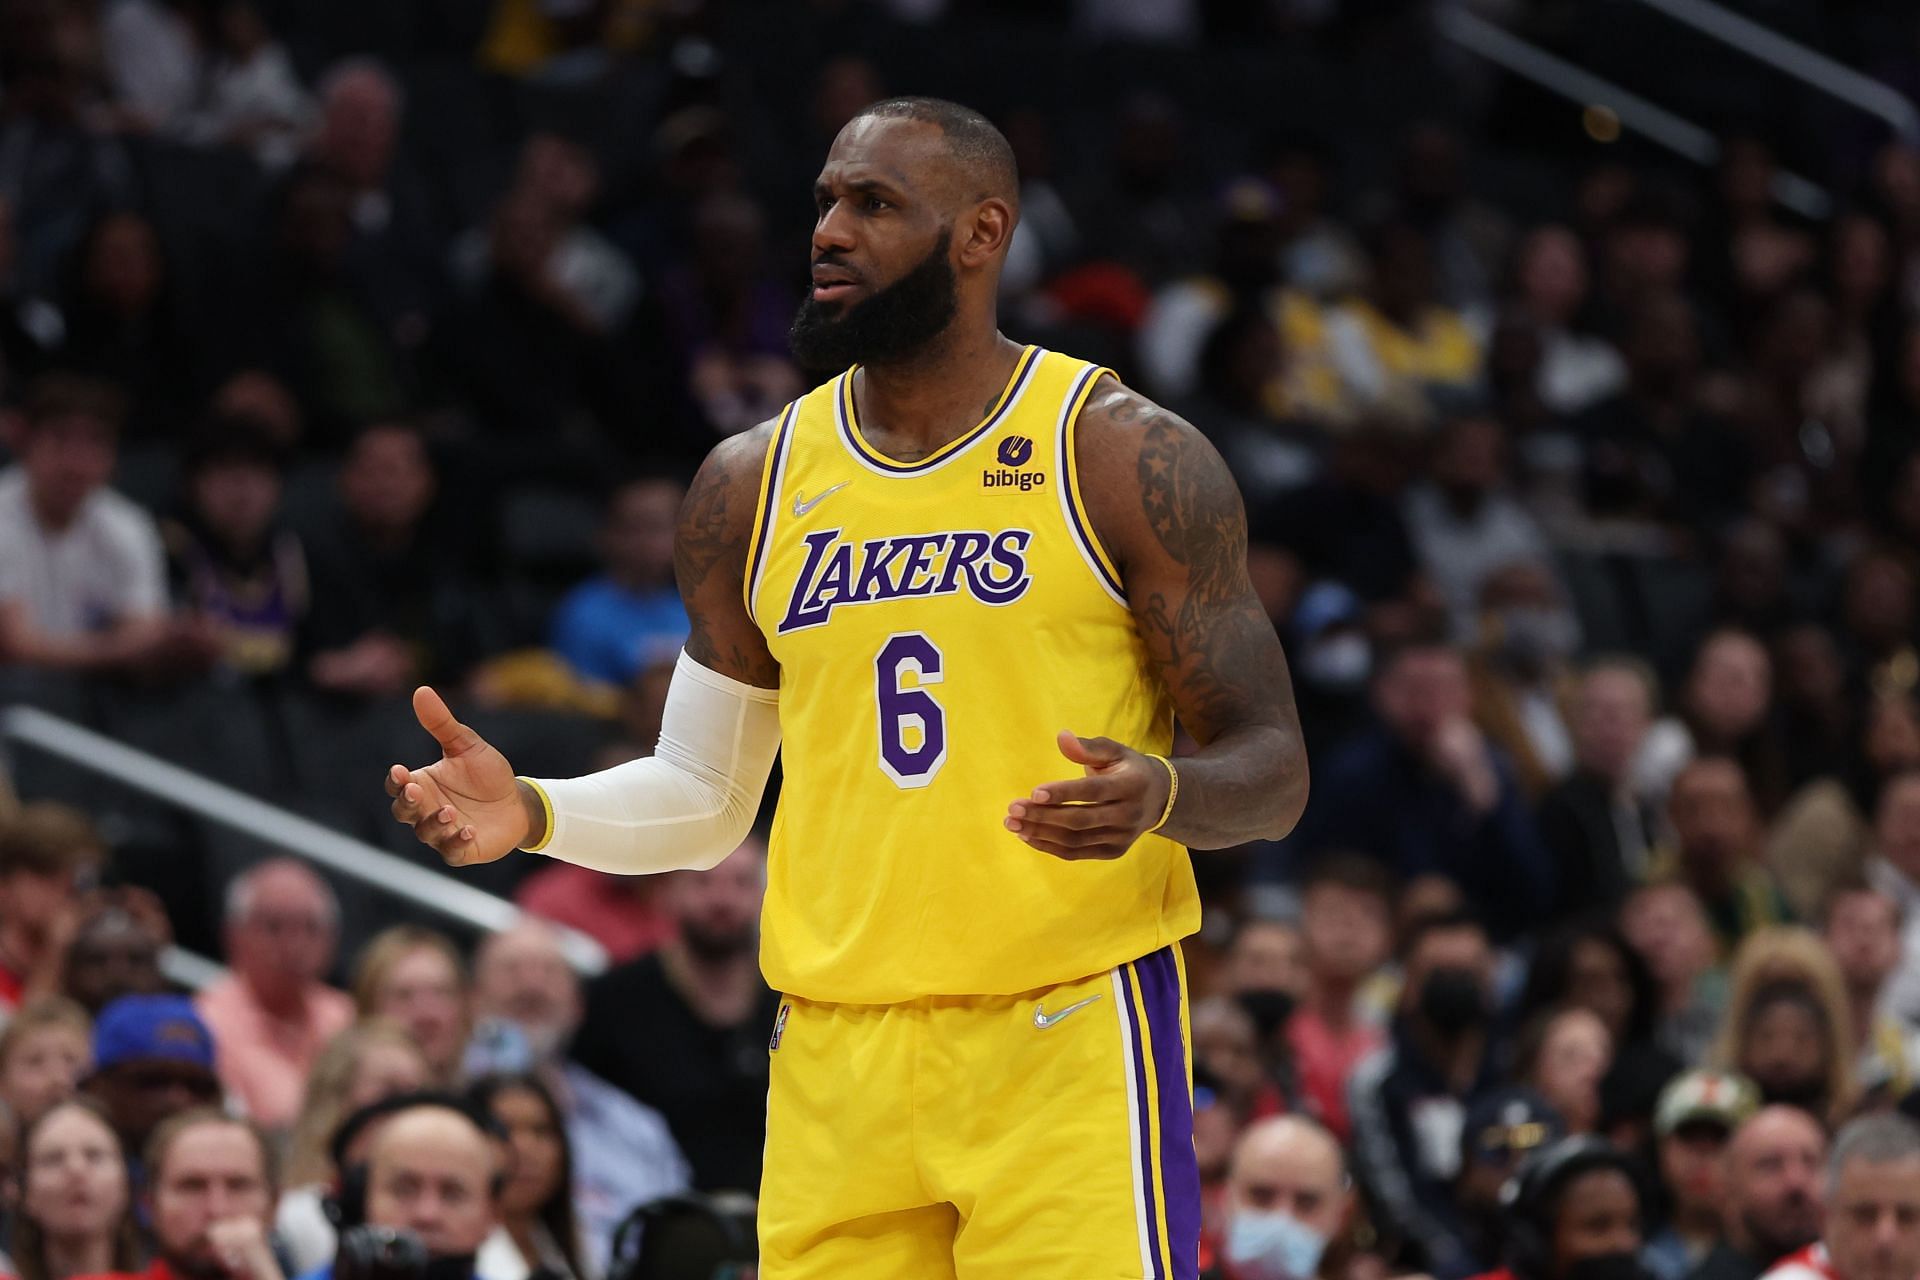 LeBron James of the LA Lakers reacts during a game